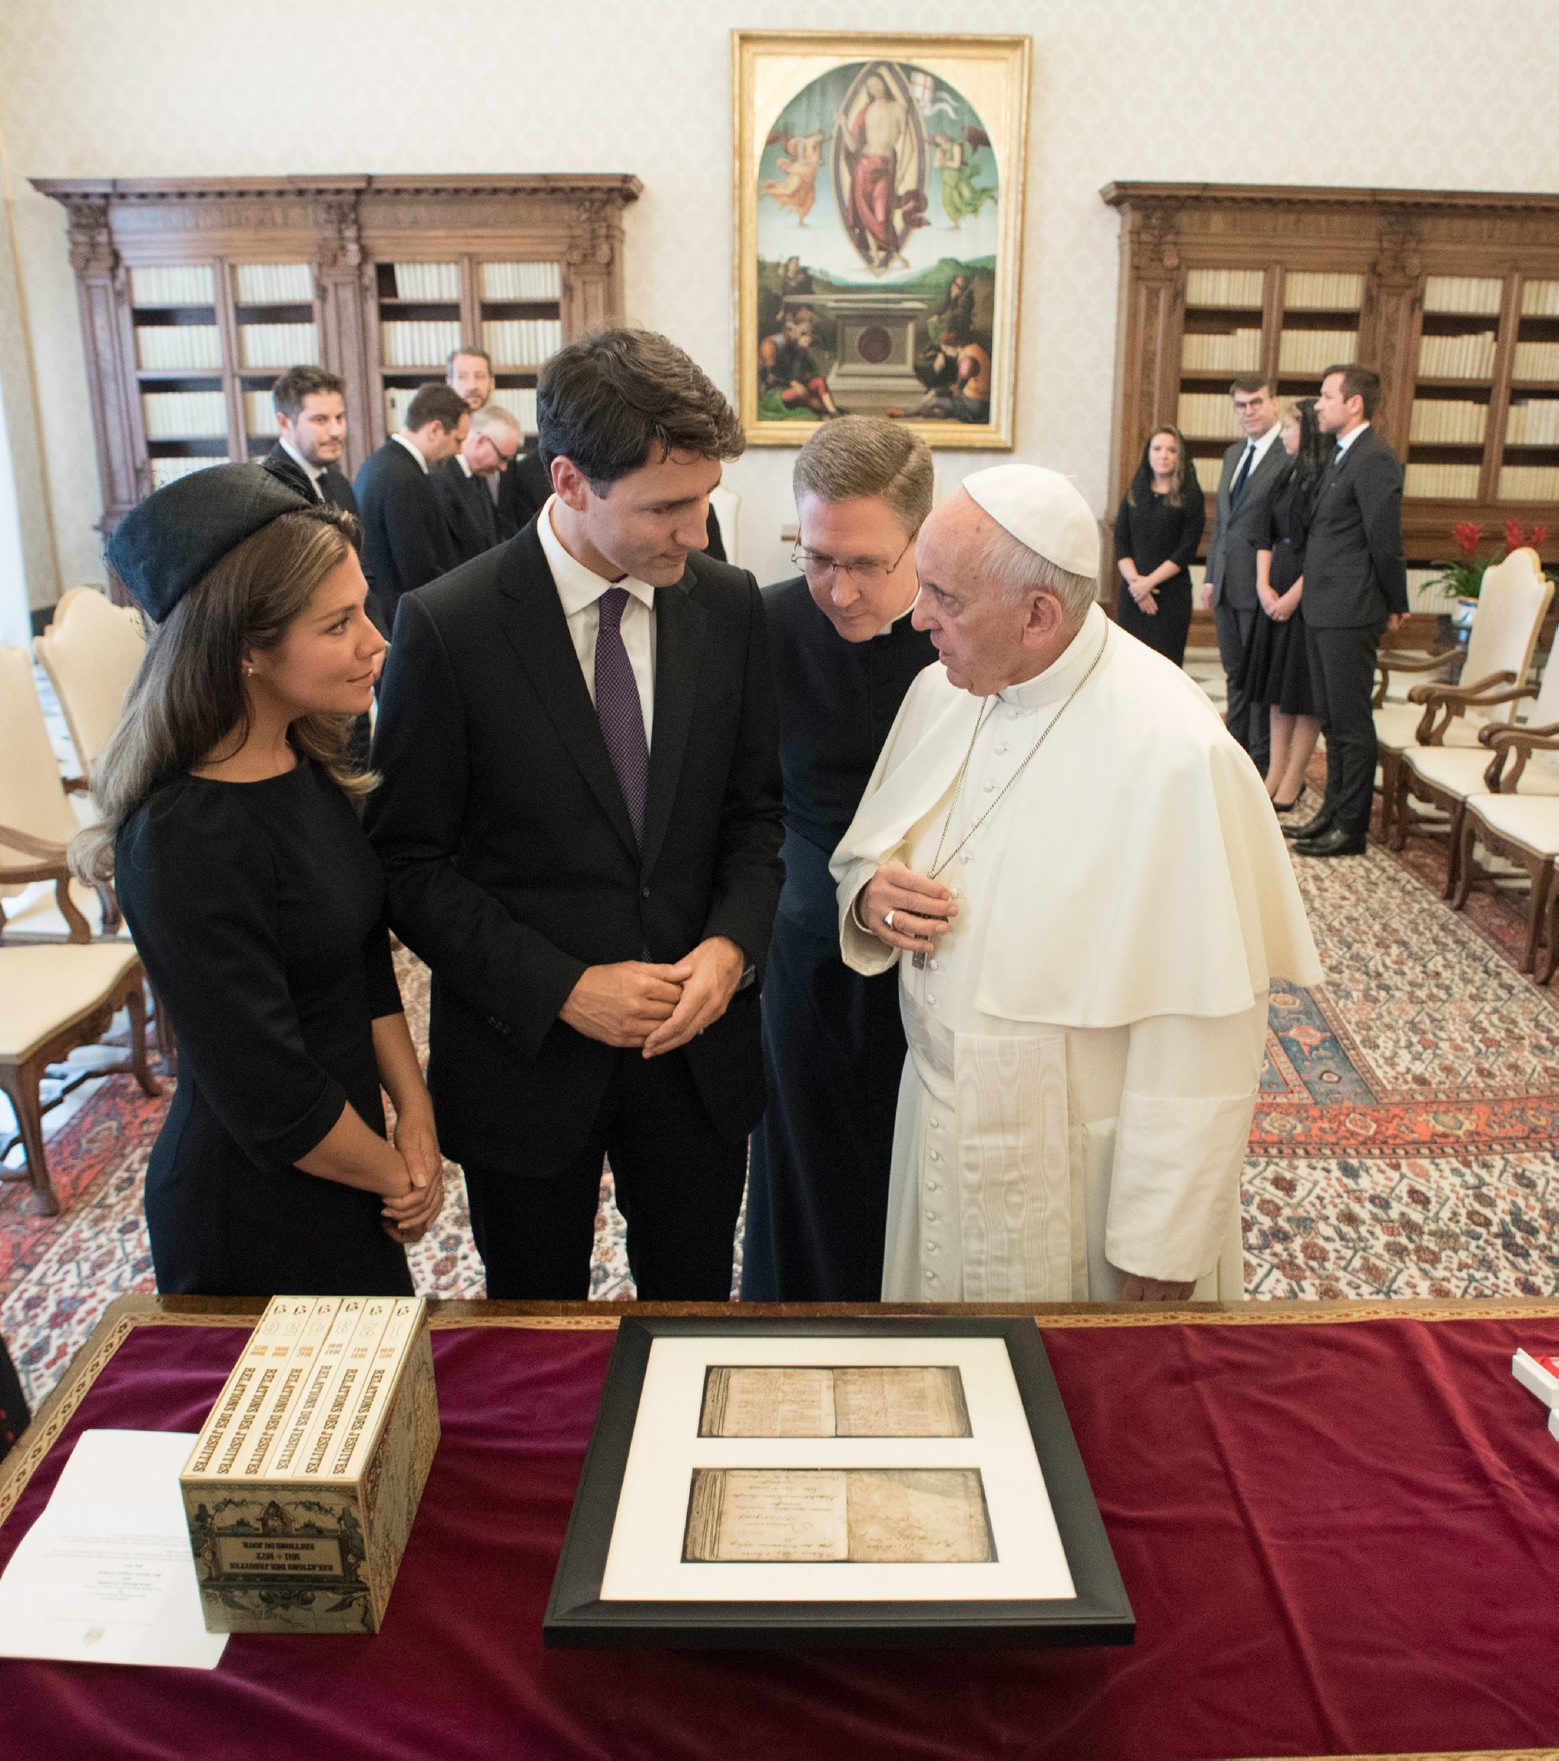 Canadian Prime Minister Justin Trudeau and his wife Sophie Gregoire-Trudeau exchange gifts with Pope Francis on the occasion of their private audience, at the Vatican, Monday, May 29, 2017. (L'Osservatore Romano/Pool Photo via AP) Vatican Canada